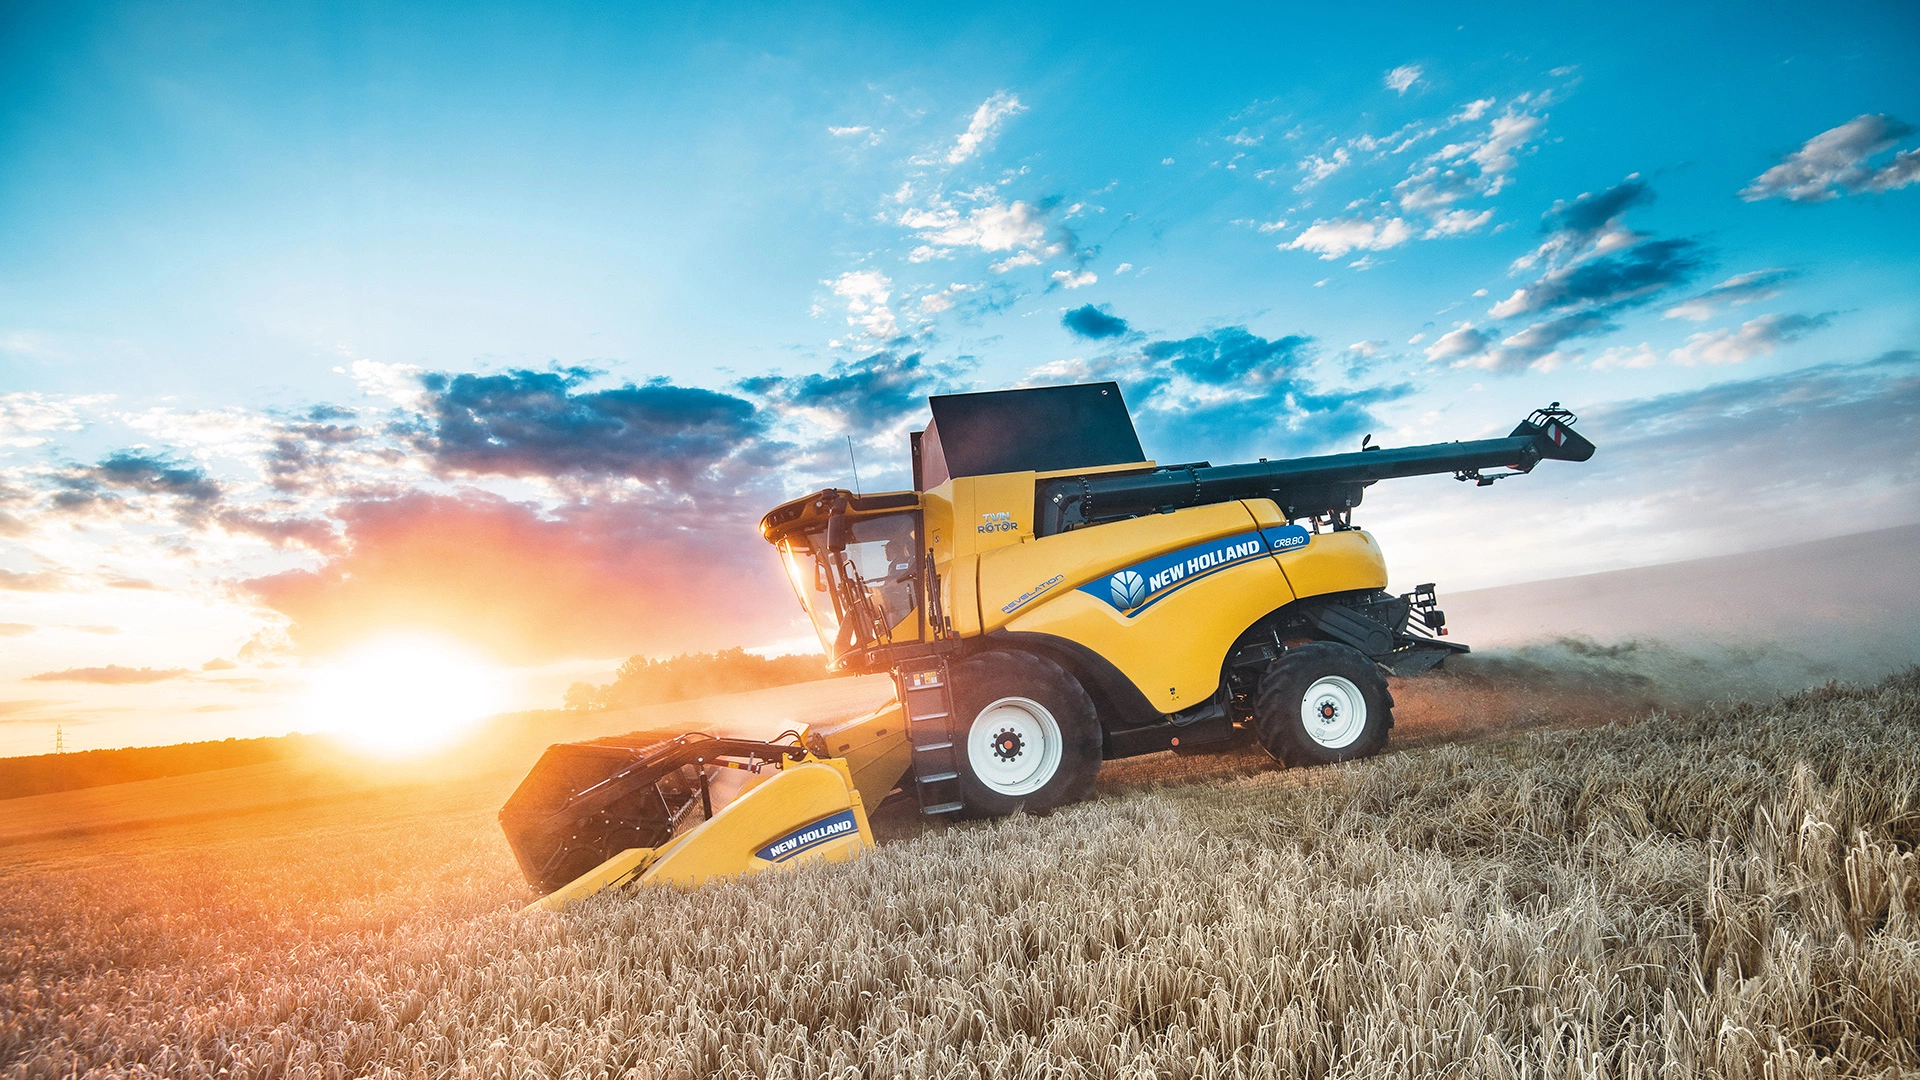 New Holland's CR Revelation combine and tractors collaborating in the field